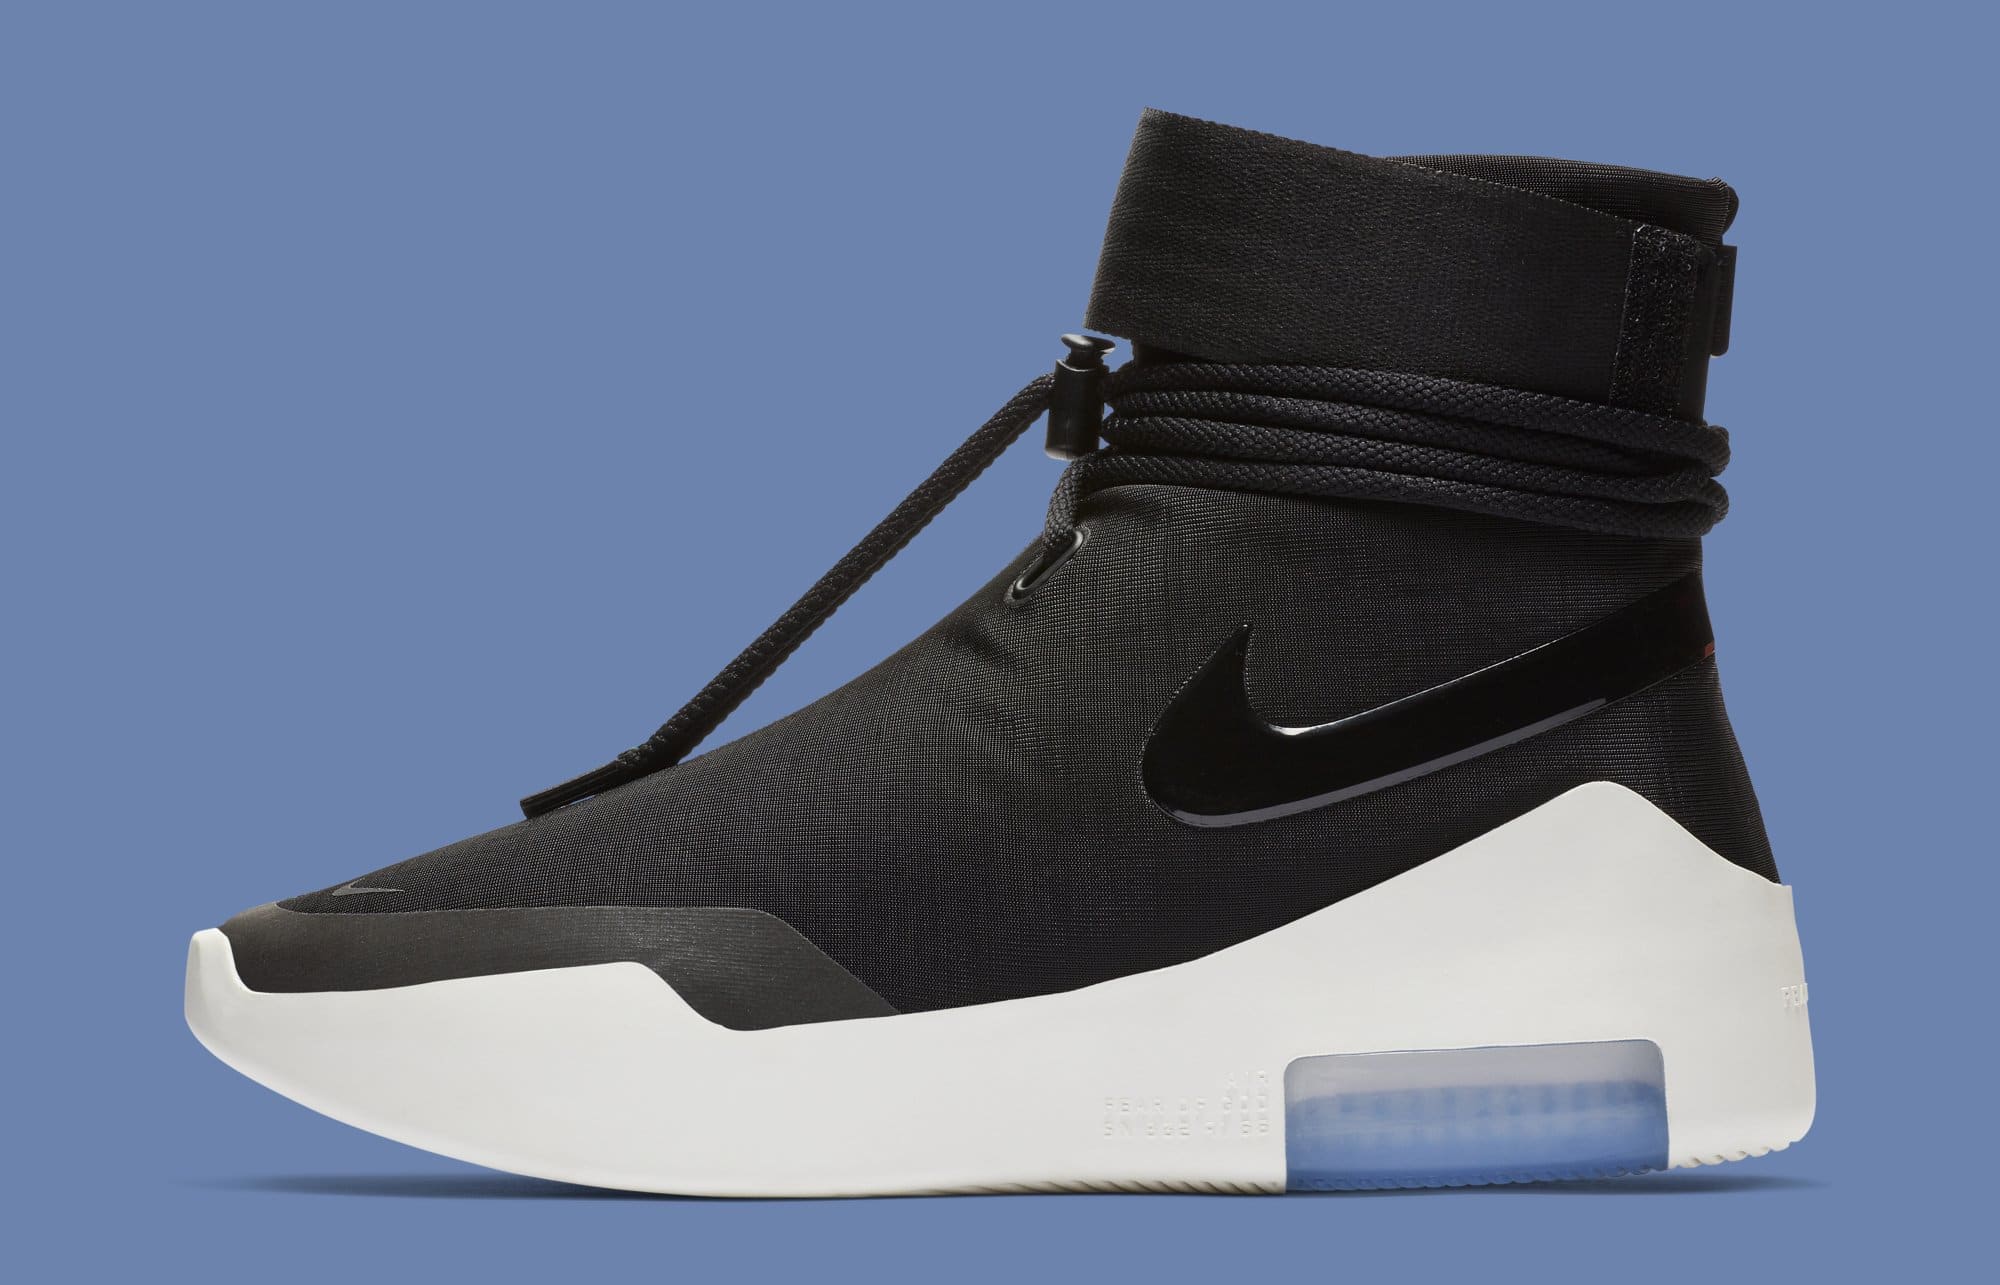 Best Look Yet at the Nike Air Fear of God SA | Complex